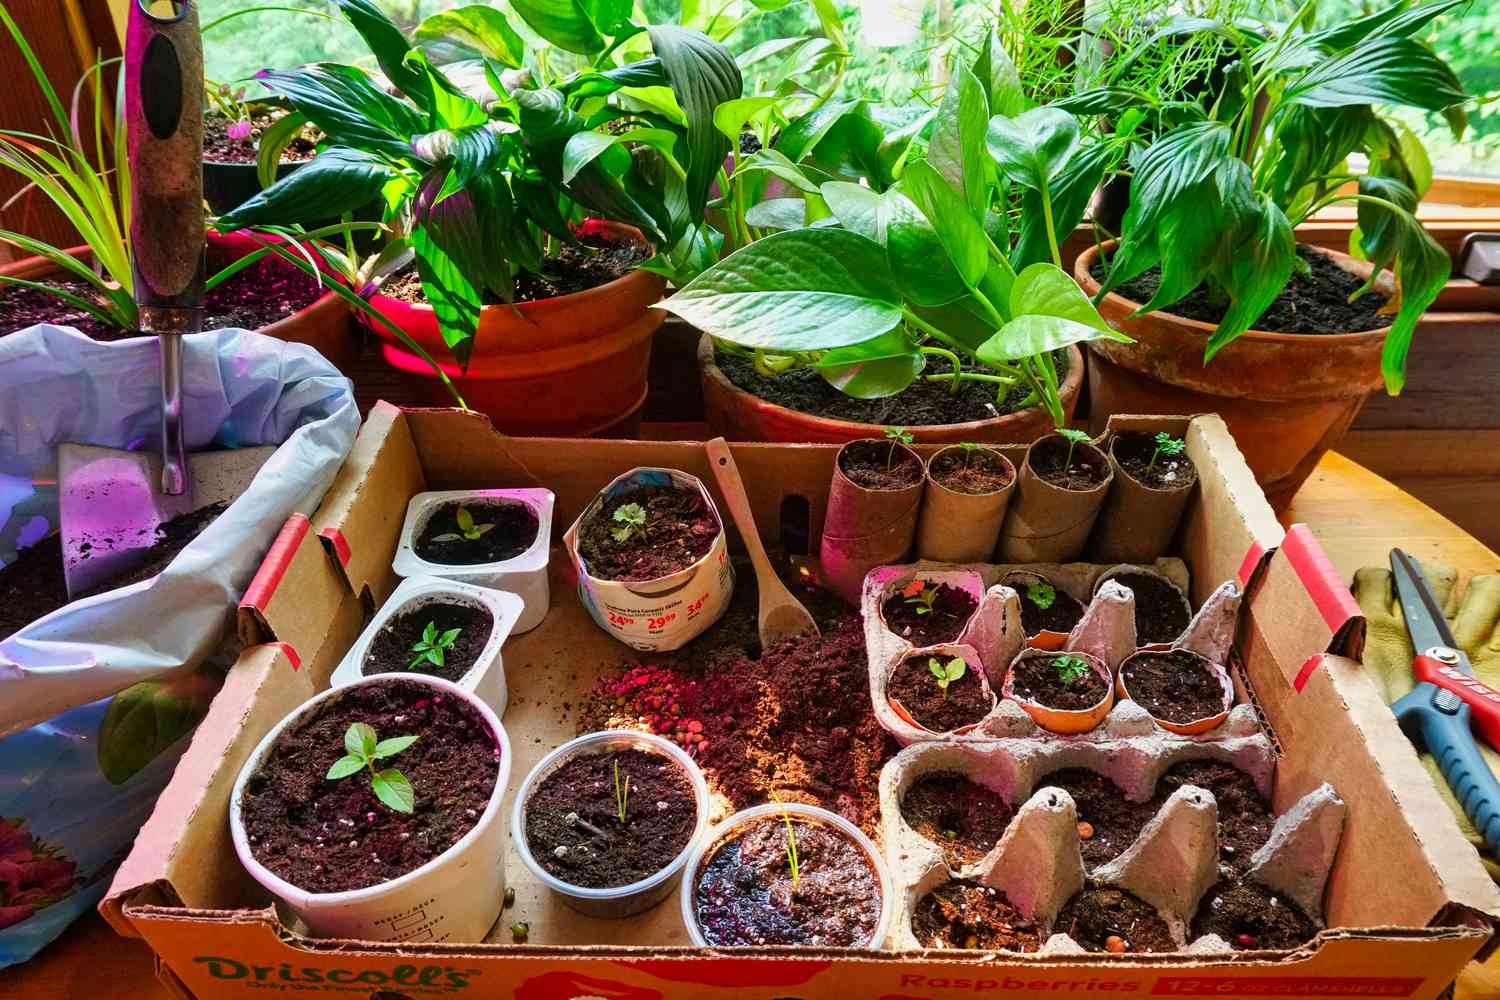 Plant Flower Seeds Indoors In Pots Anytime For Year-Round Blooms!